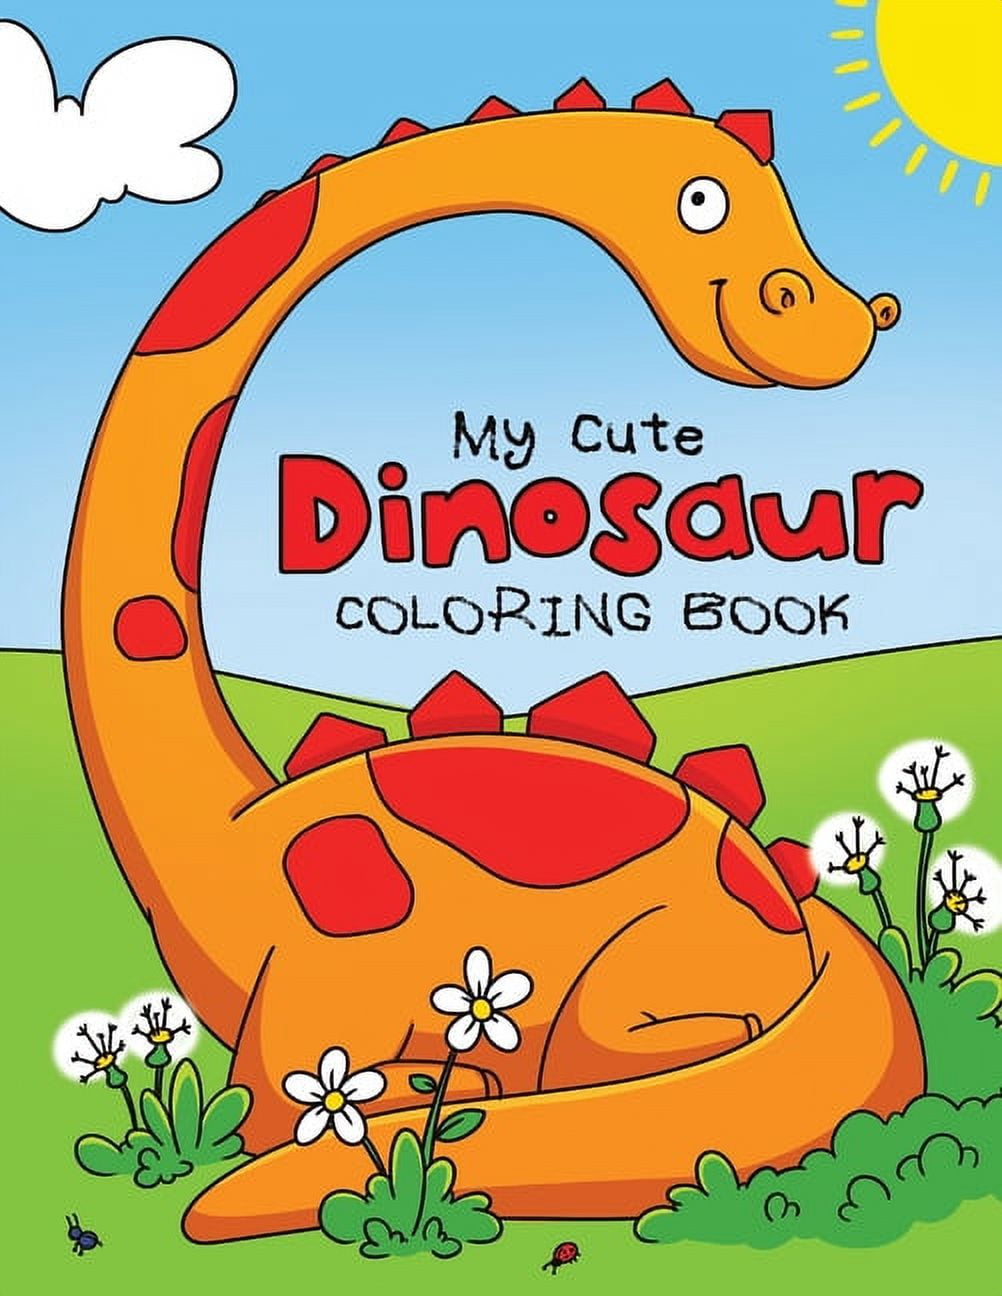 Dinosaur Coloring Book: Large Dinosaur Coloring Books for Kids Ages 4-8 -  Dino Colouring Book for Children with 60 Pages to Color - Great Gift